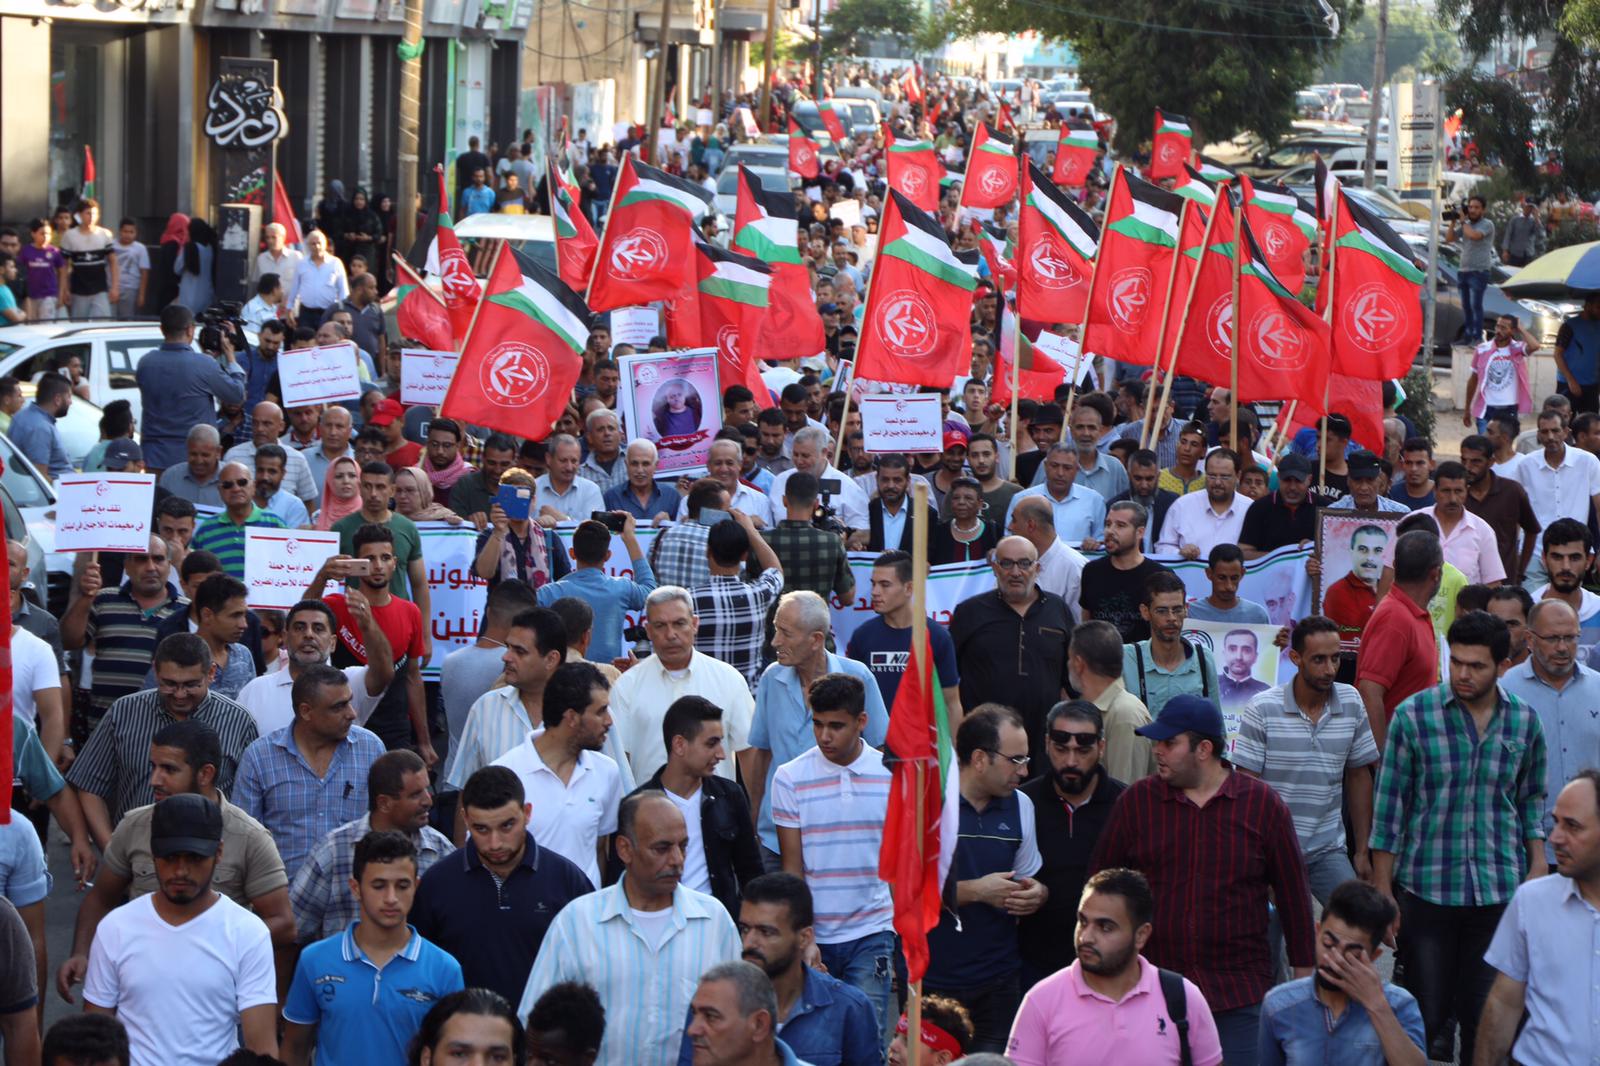 Hundreds march in Ramallah and Gaza to free Palestinian ...